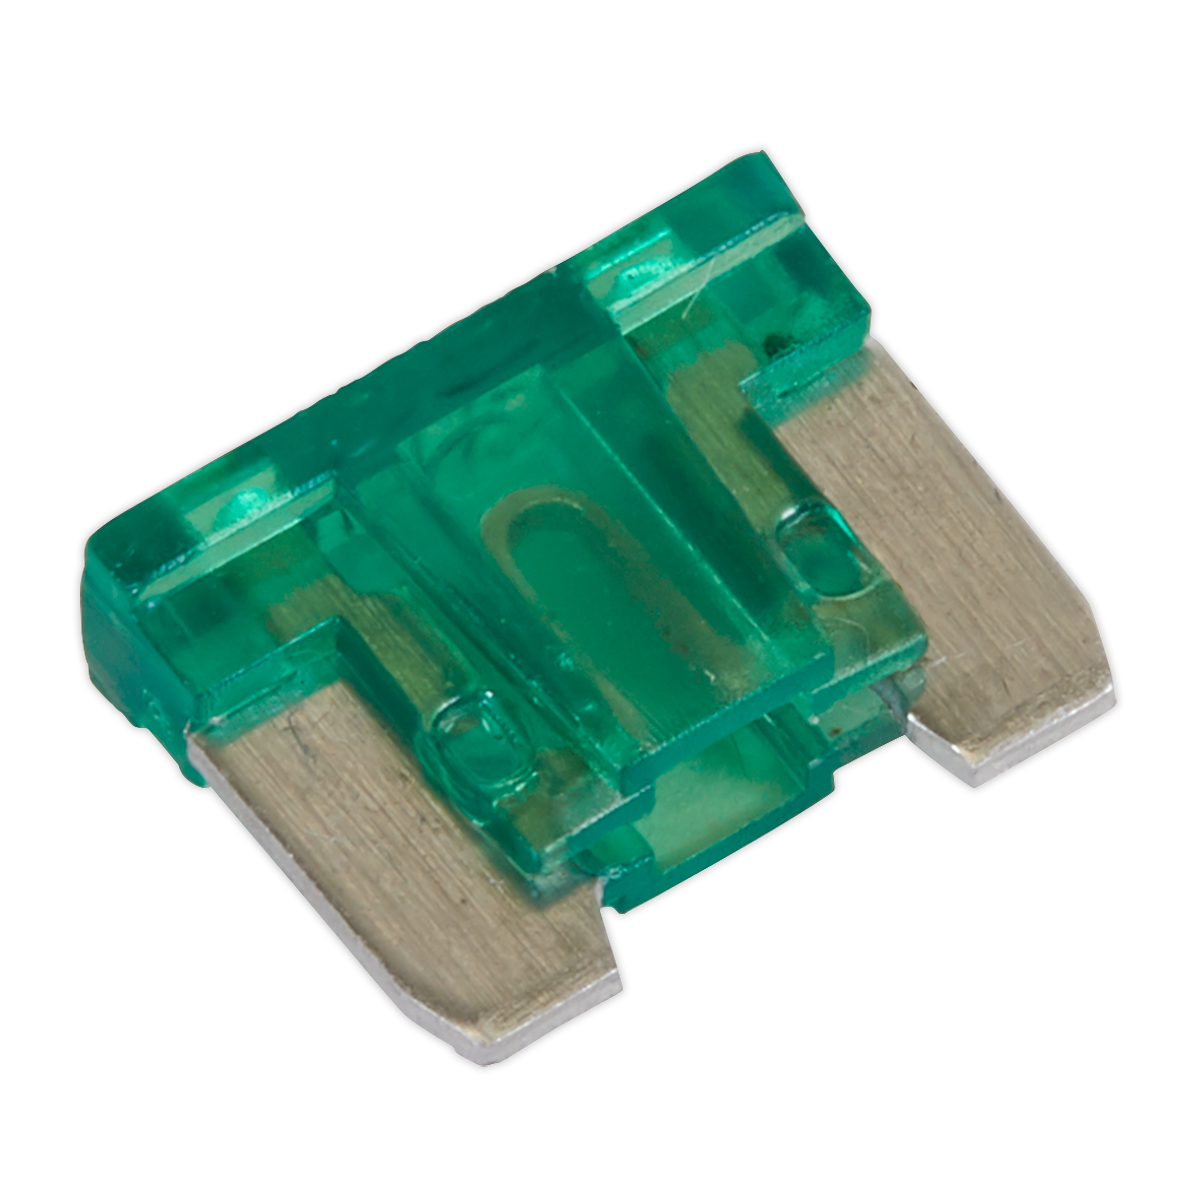 Automotive MICRO Blade Fuse 30A - Pack of 50 - MIBF30 - Farming Parts